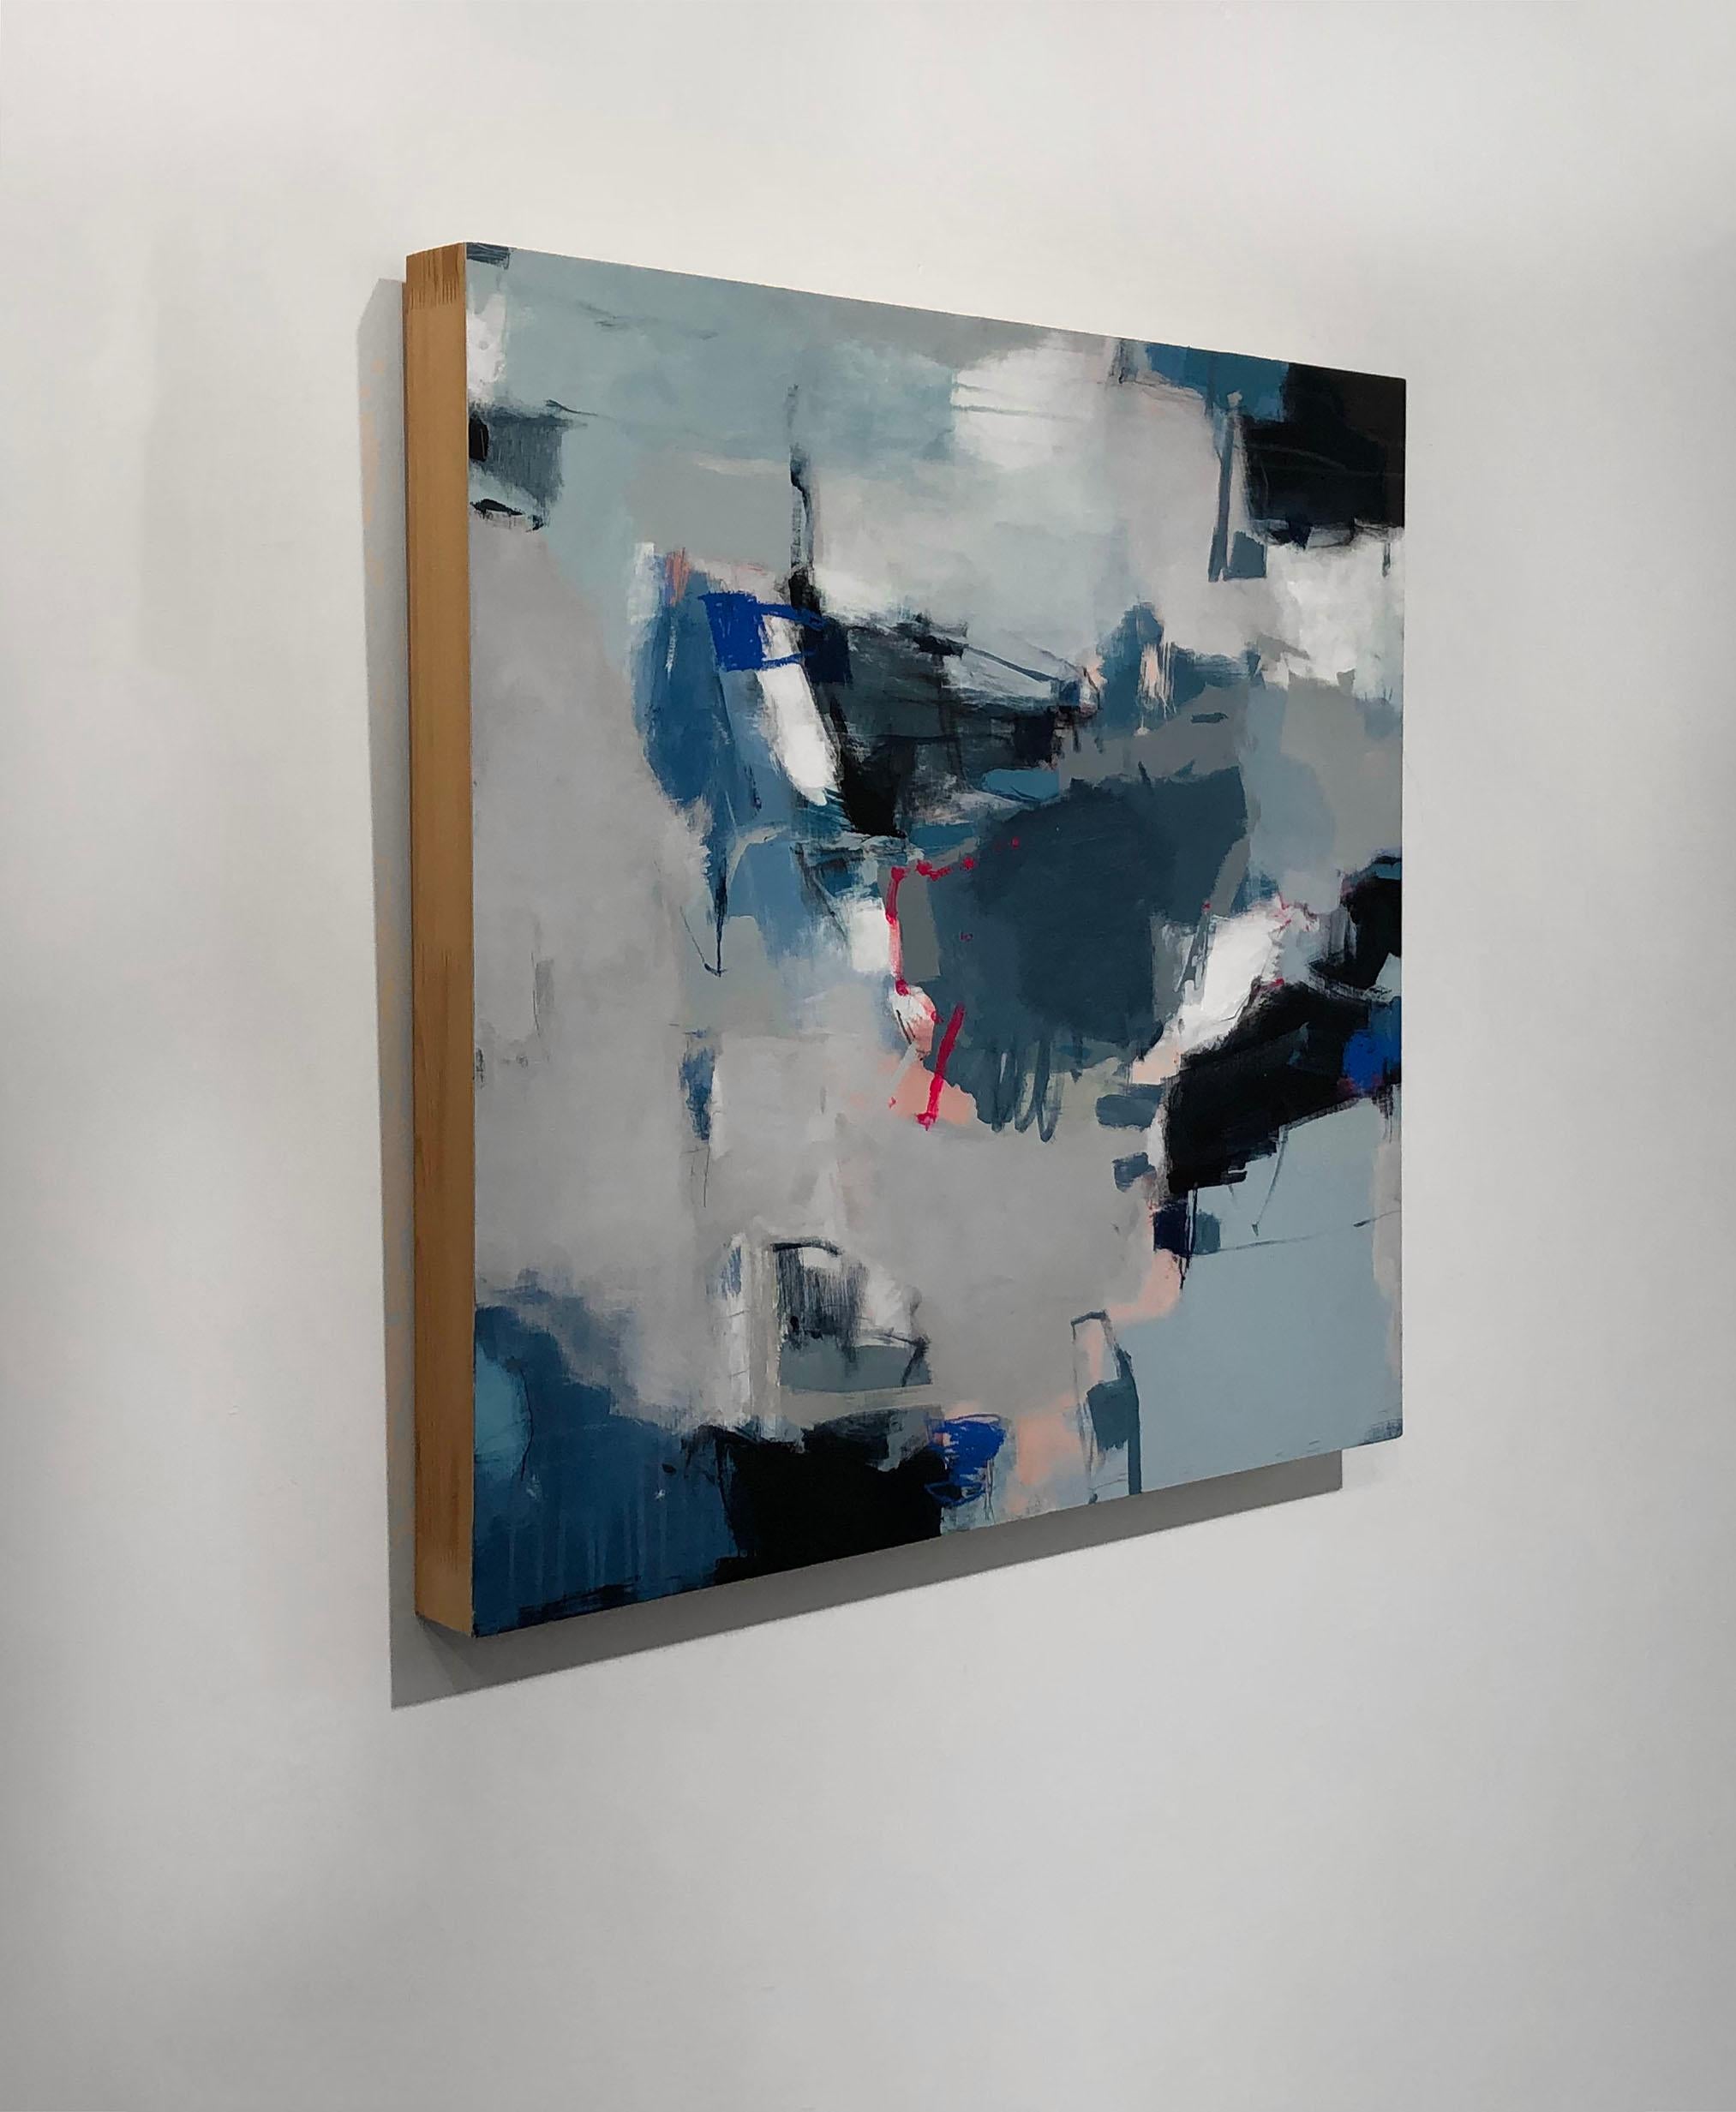 This moderately-sized abstract painting by Kelly Rossetti is made with mixed media on panel. Strokes of different shades and hues of blue are layered overtop of one another in this contemporary piece, with larger areas of black throughout. At the